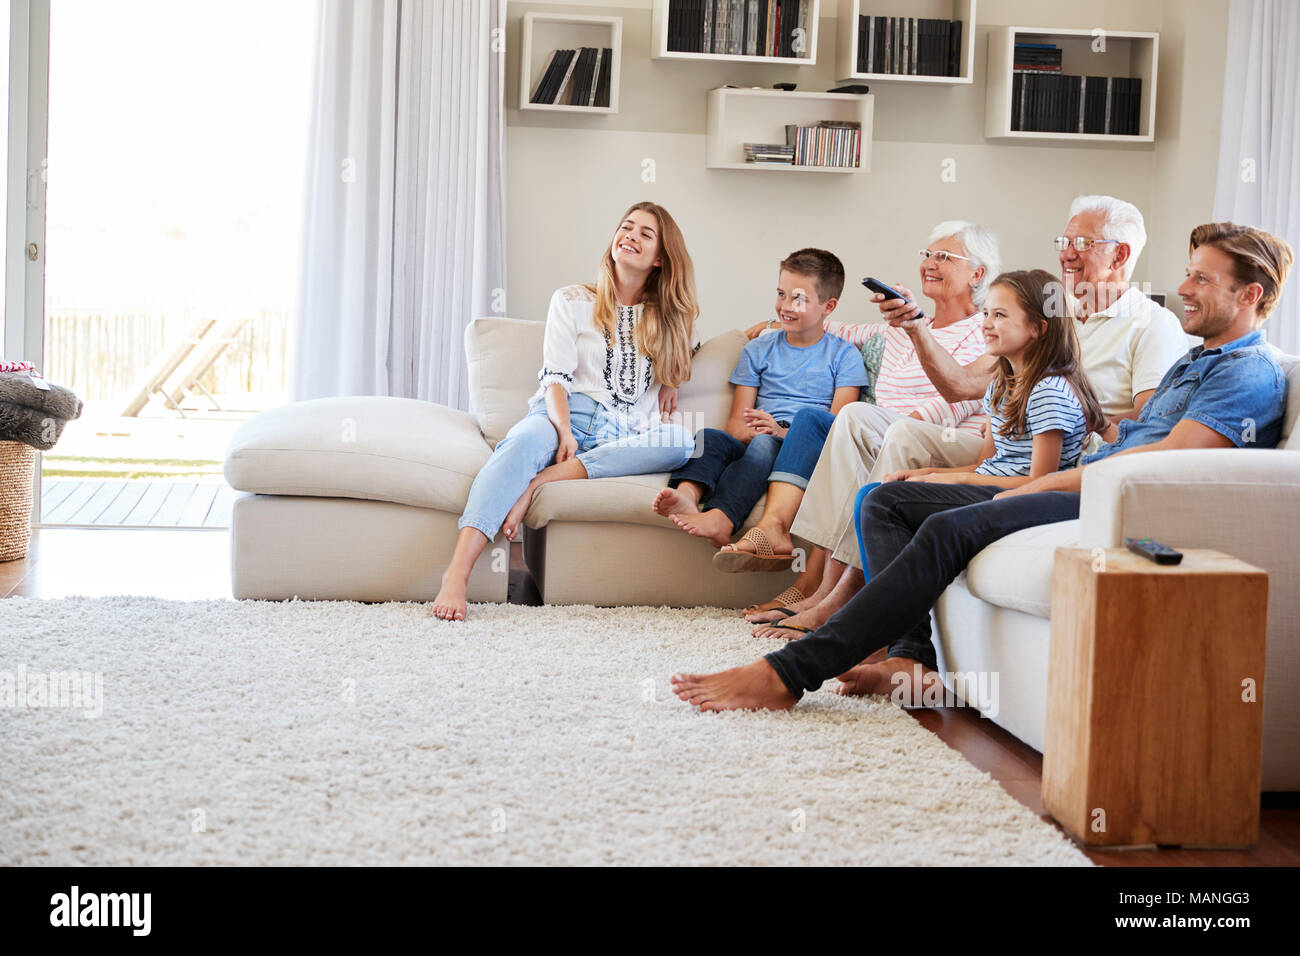 Multi Generation Family Sitting On Sofa At Home Watching TV Stock Photo